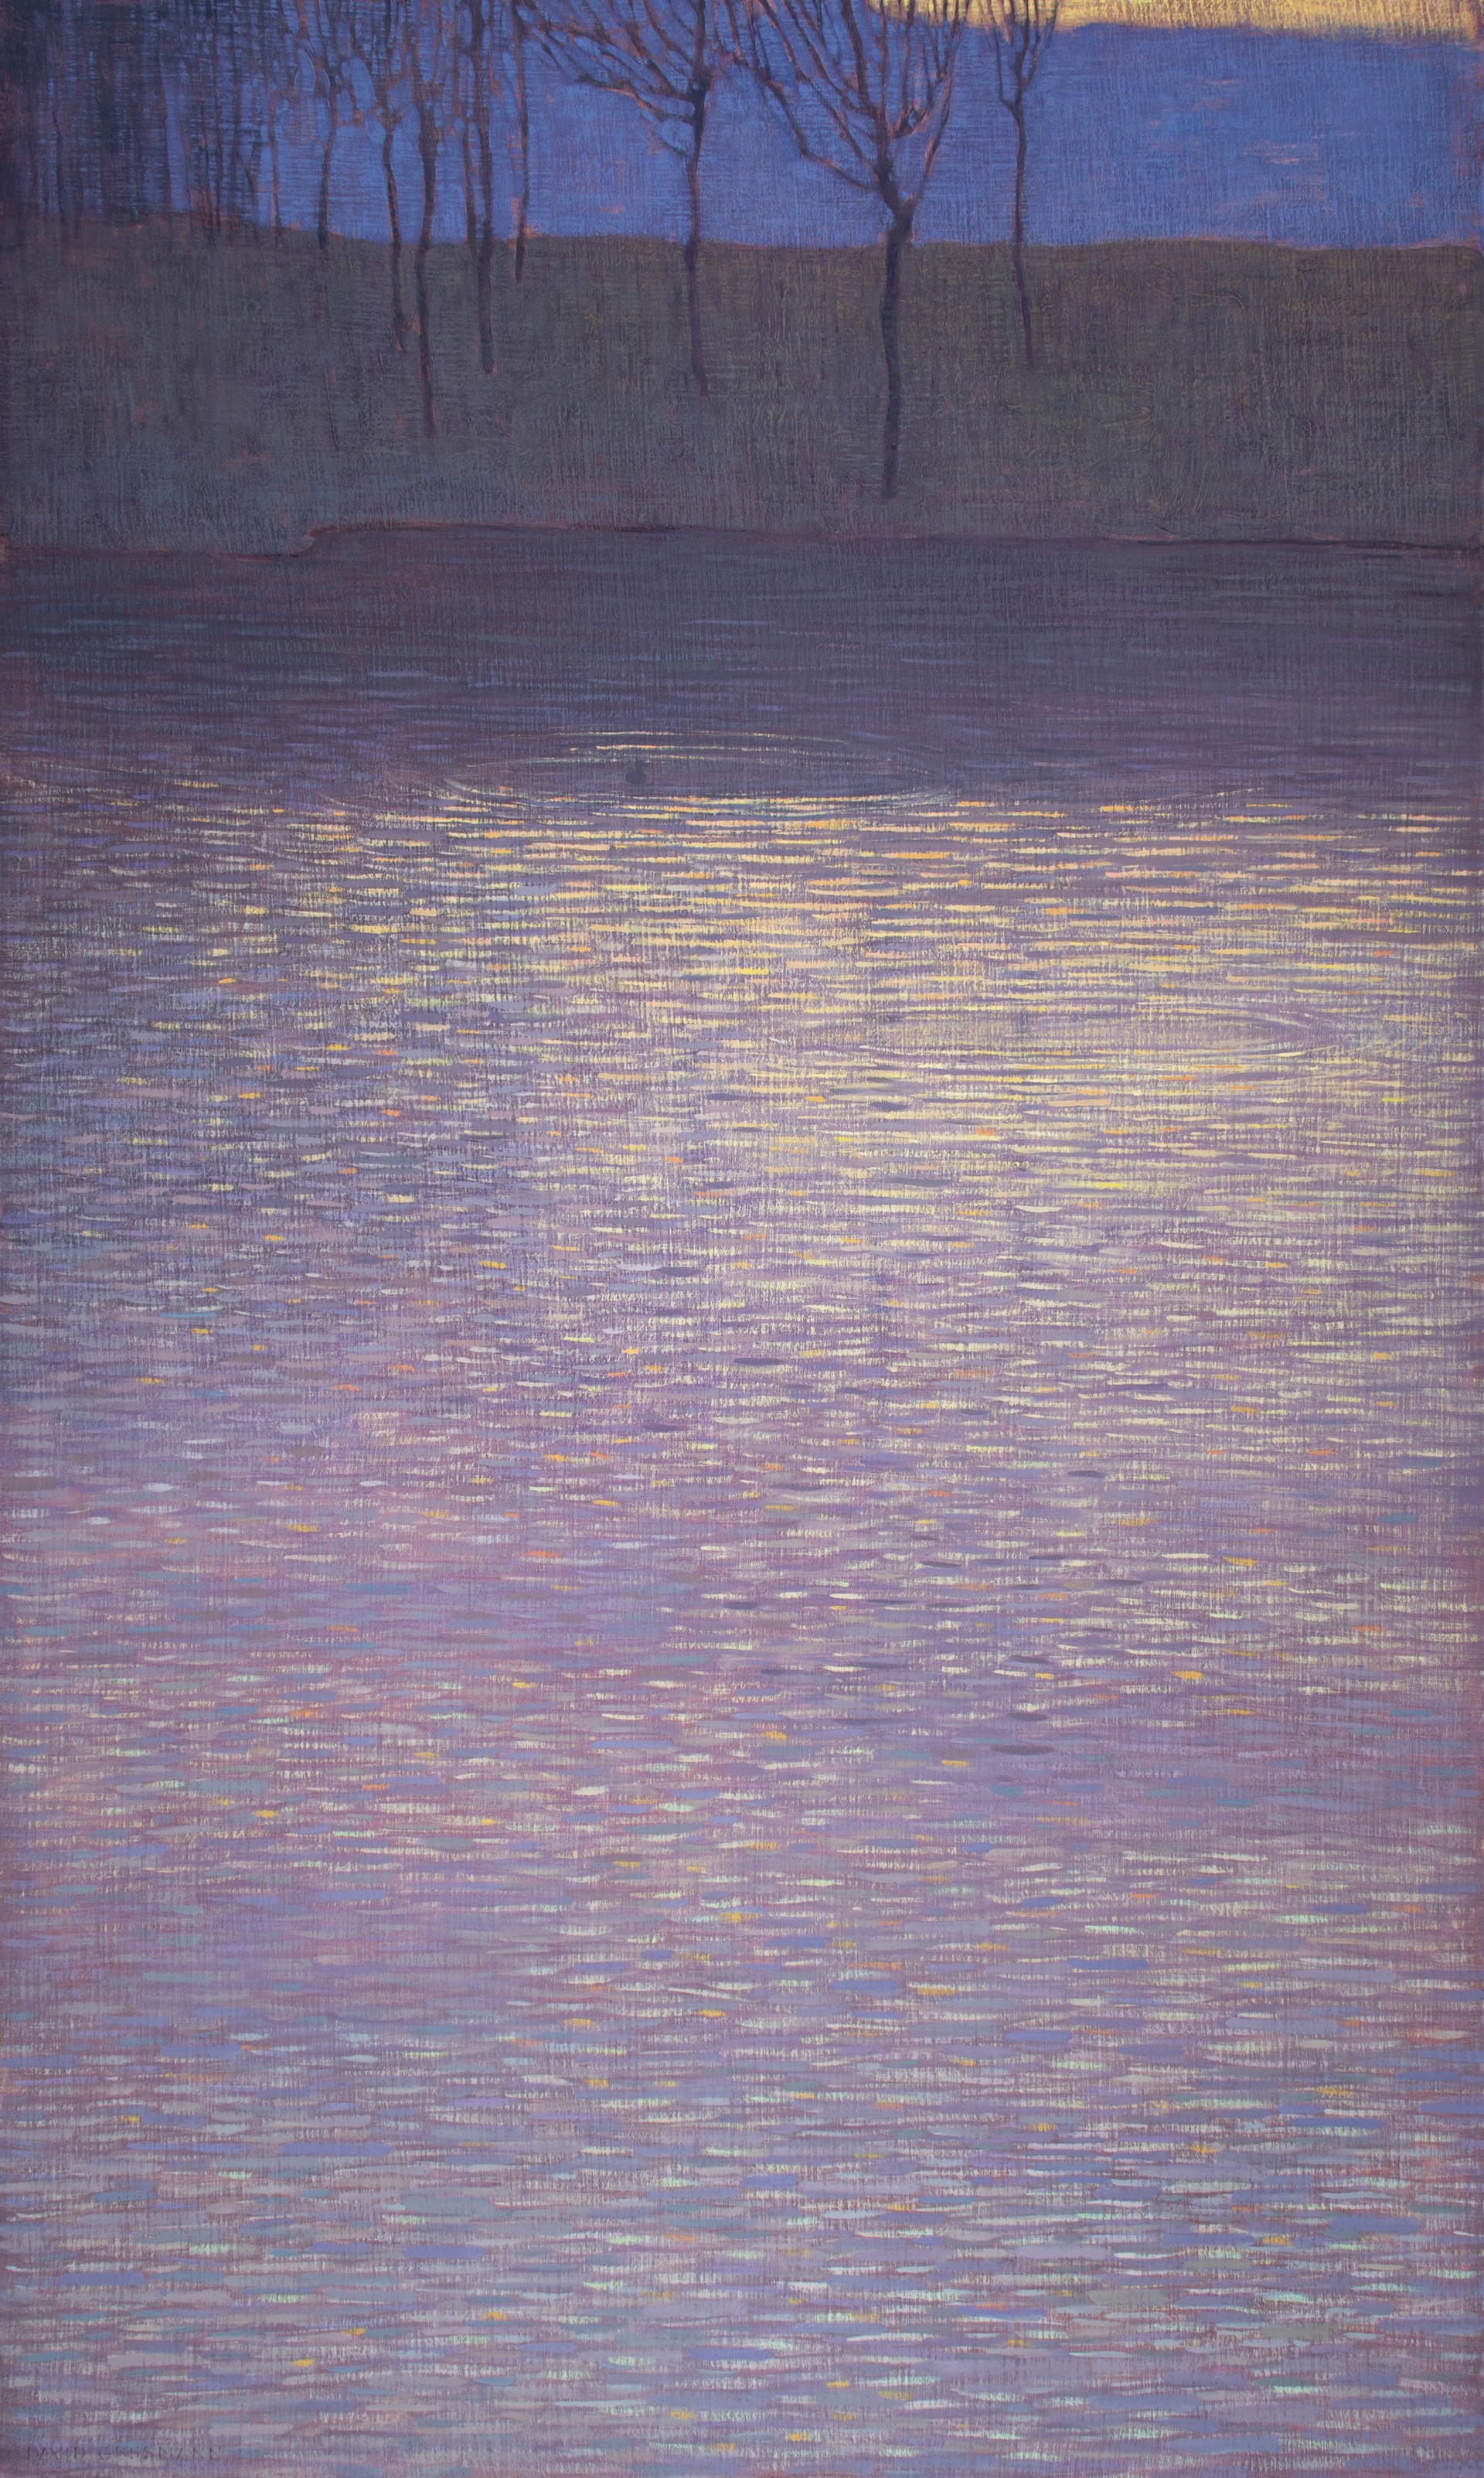 End of Day Water Colors by David Grossmann